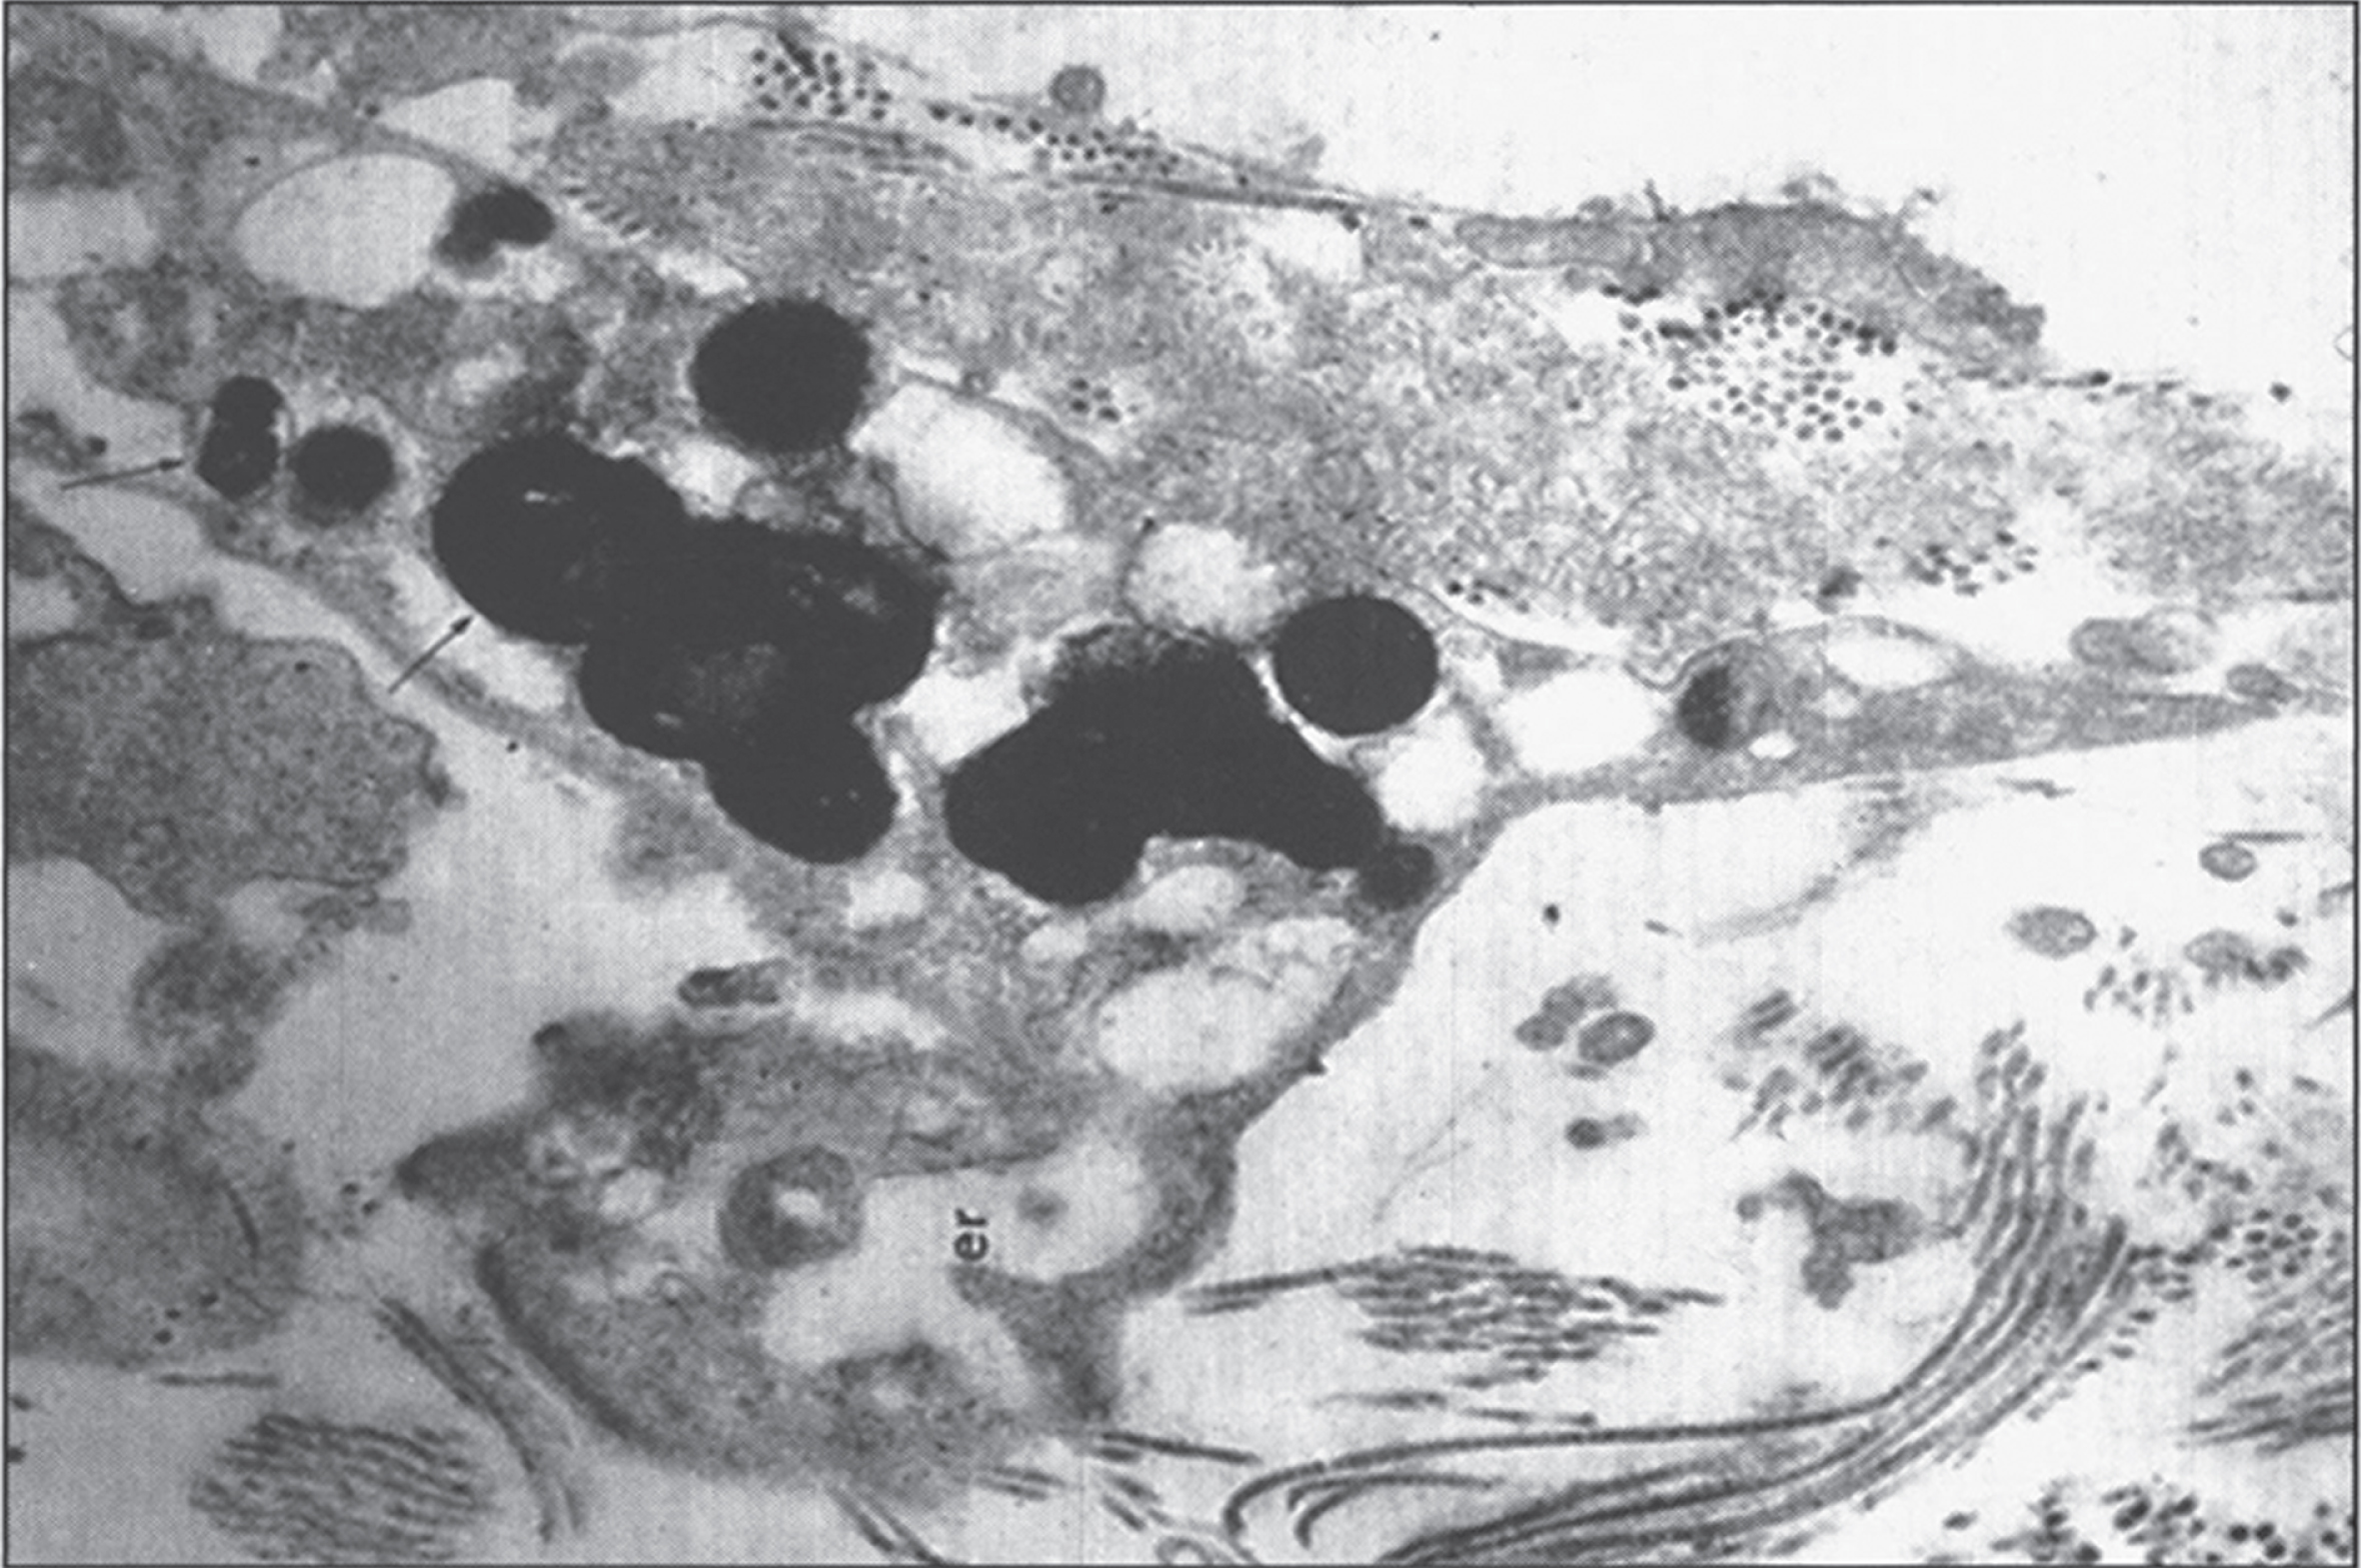 Alkaptonuria- Electron micrography of cartilage with dense pigment deposit in the collagen. (Figure 20 in the first book).